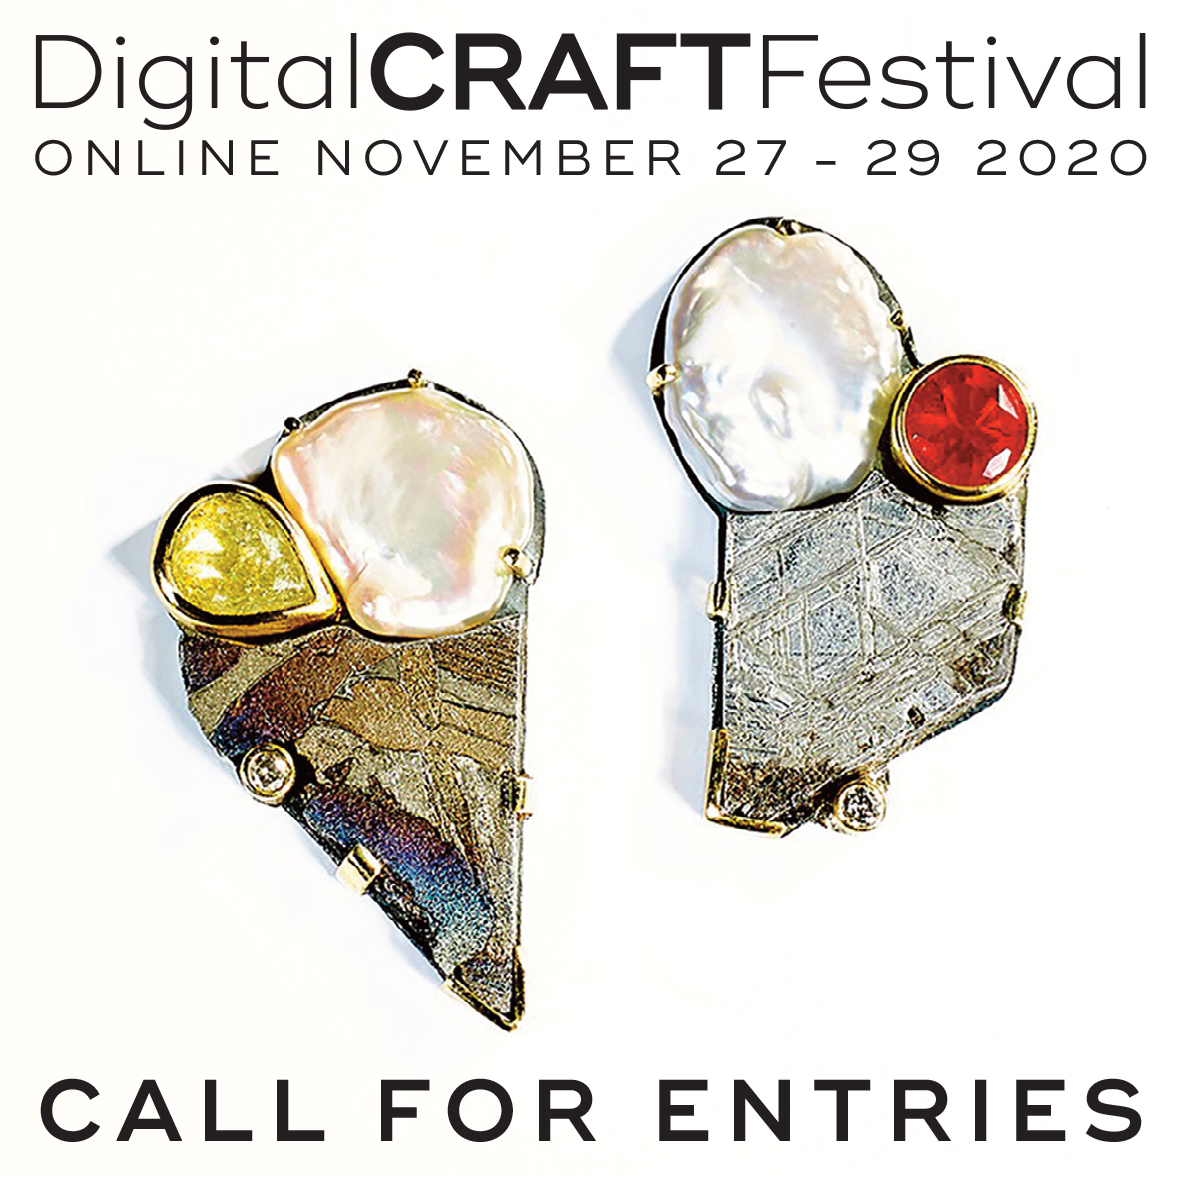 Call for Applications: Digital Craft Festival at Christmas